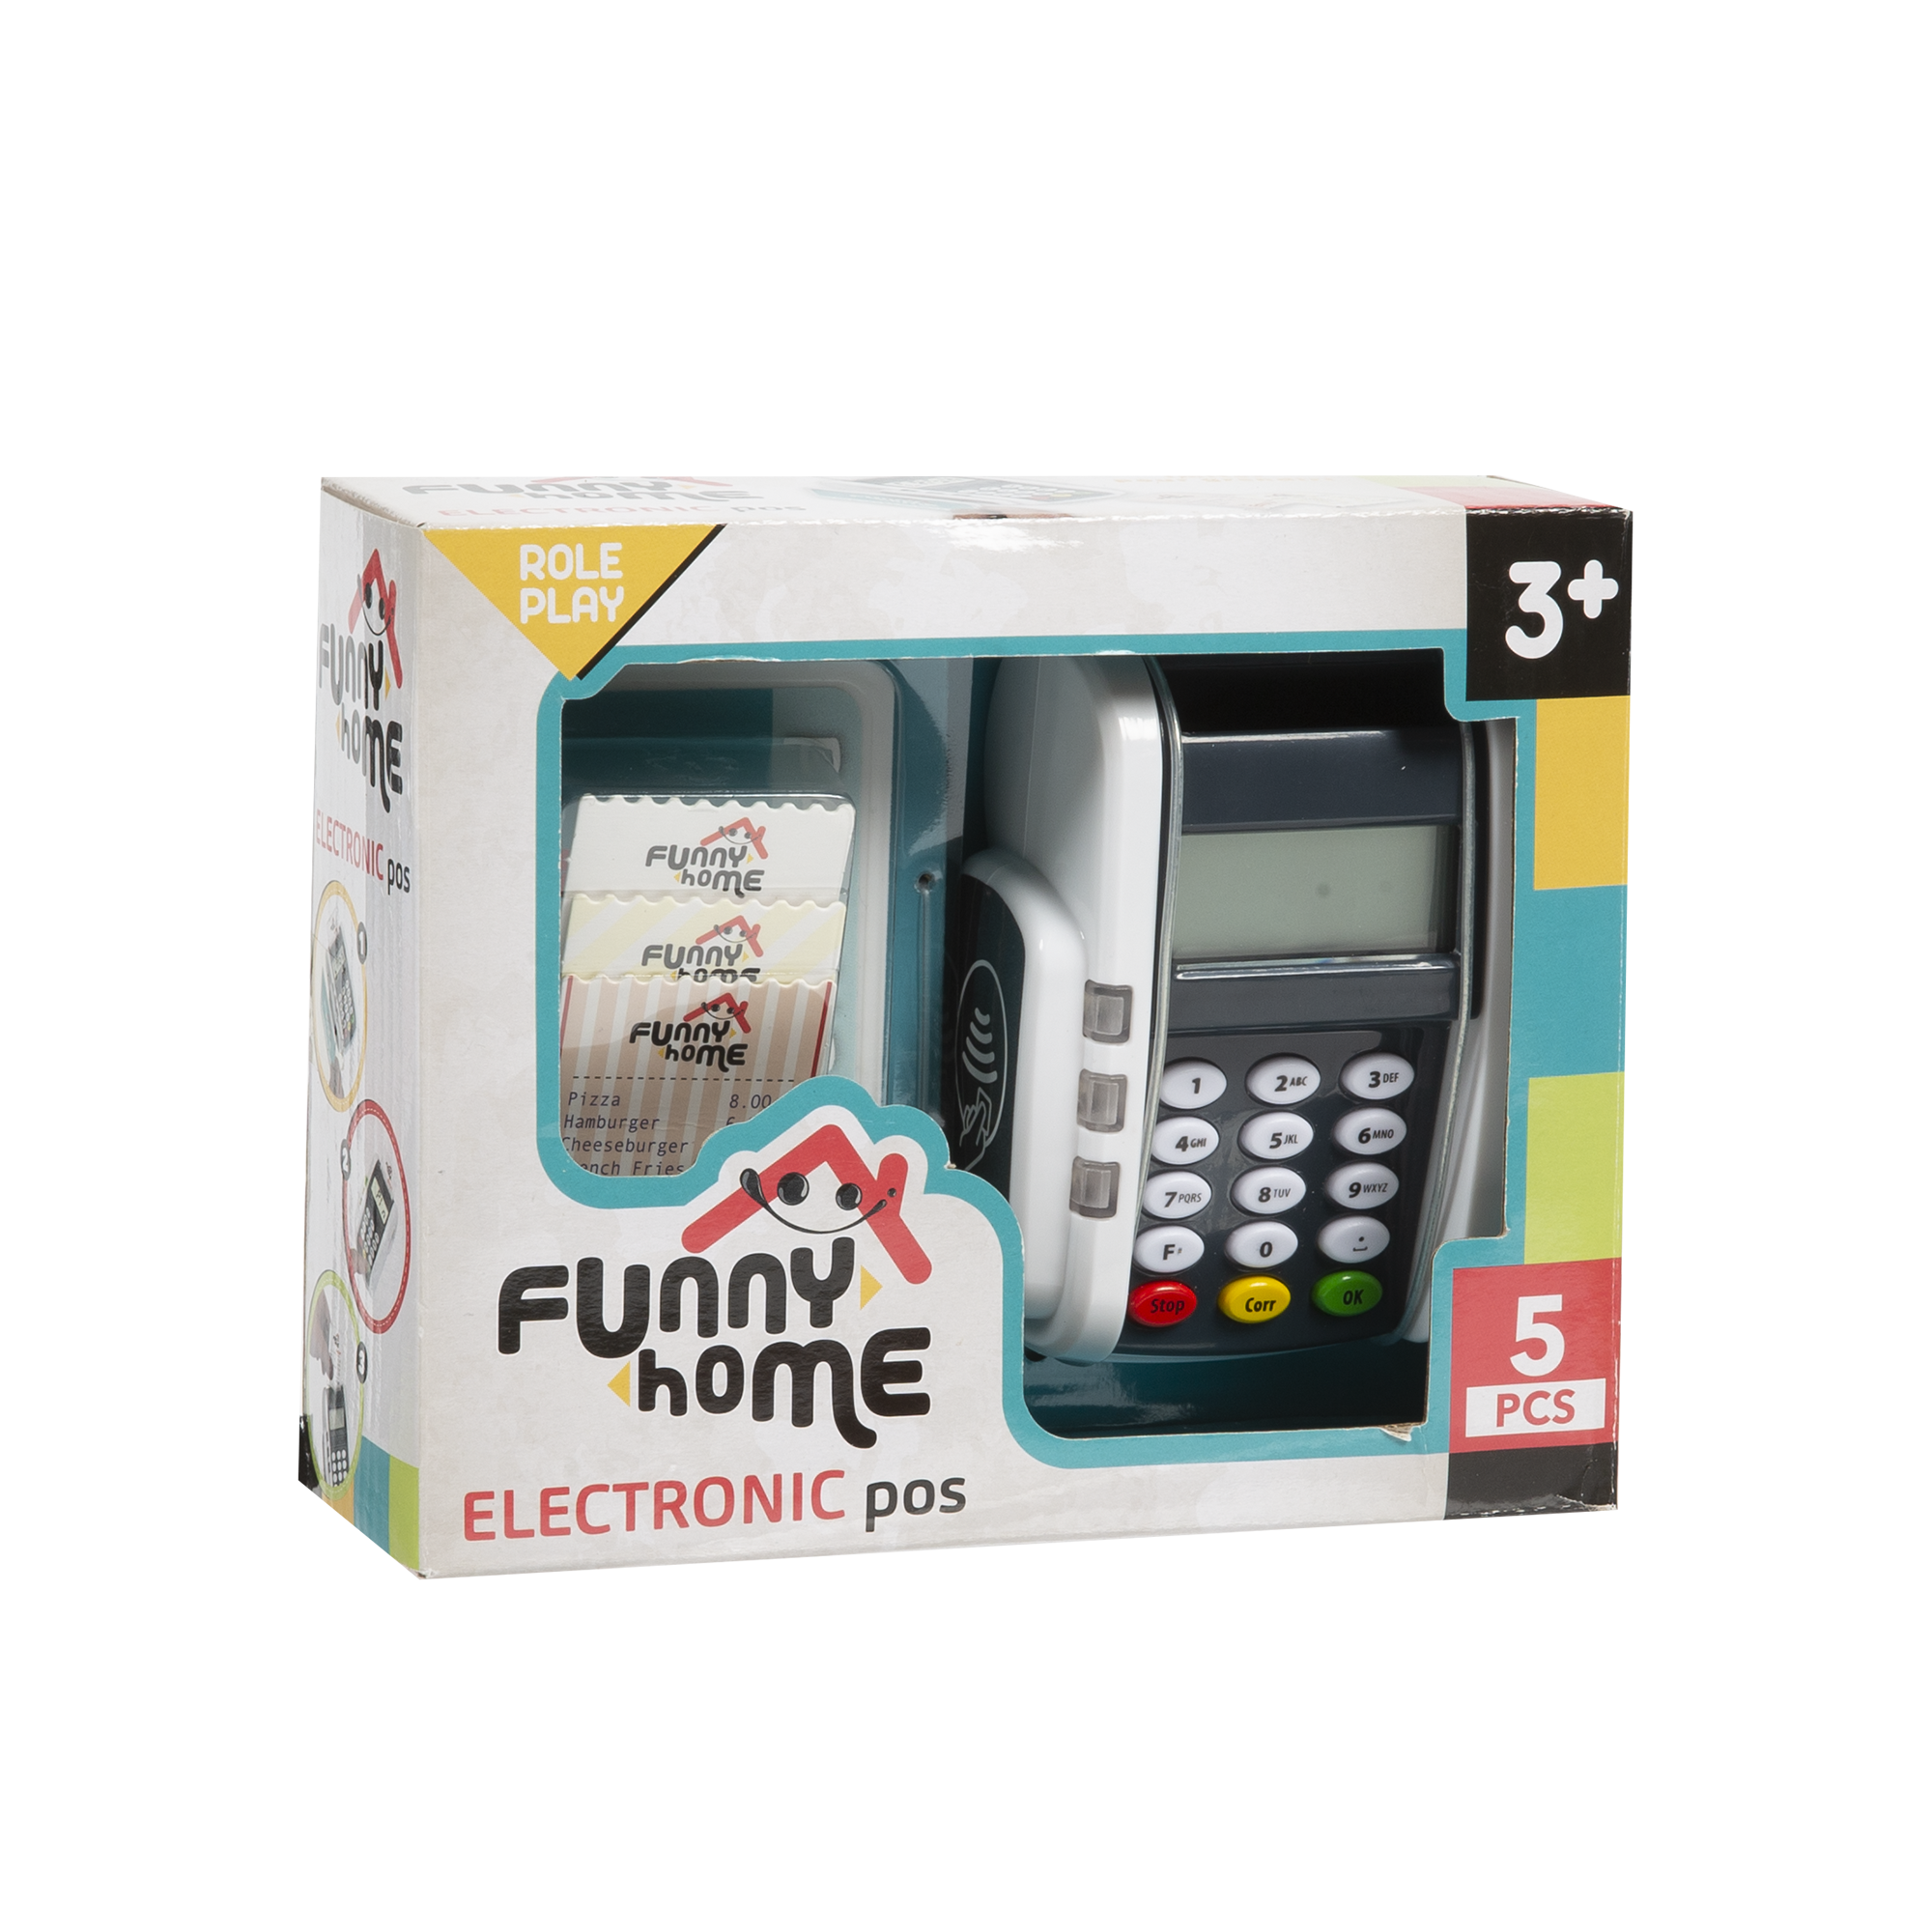 Electronic pos - FUNNY HOME